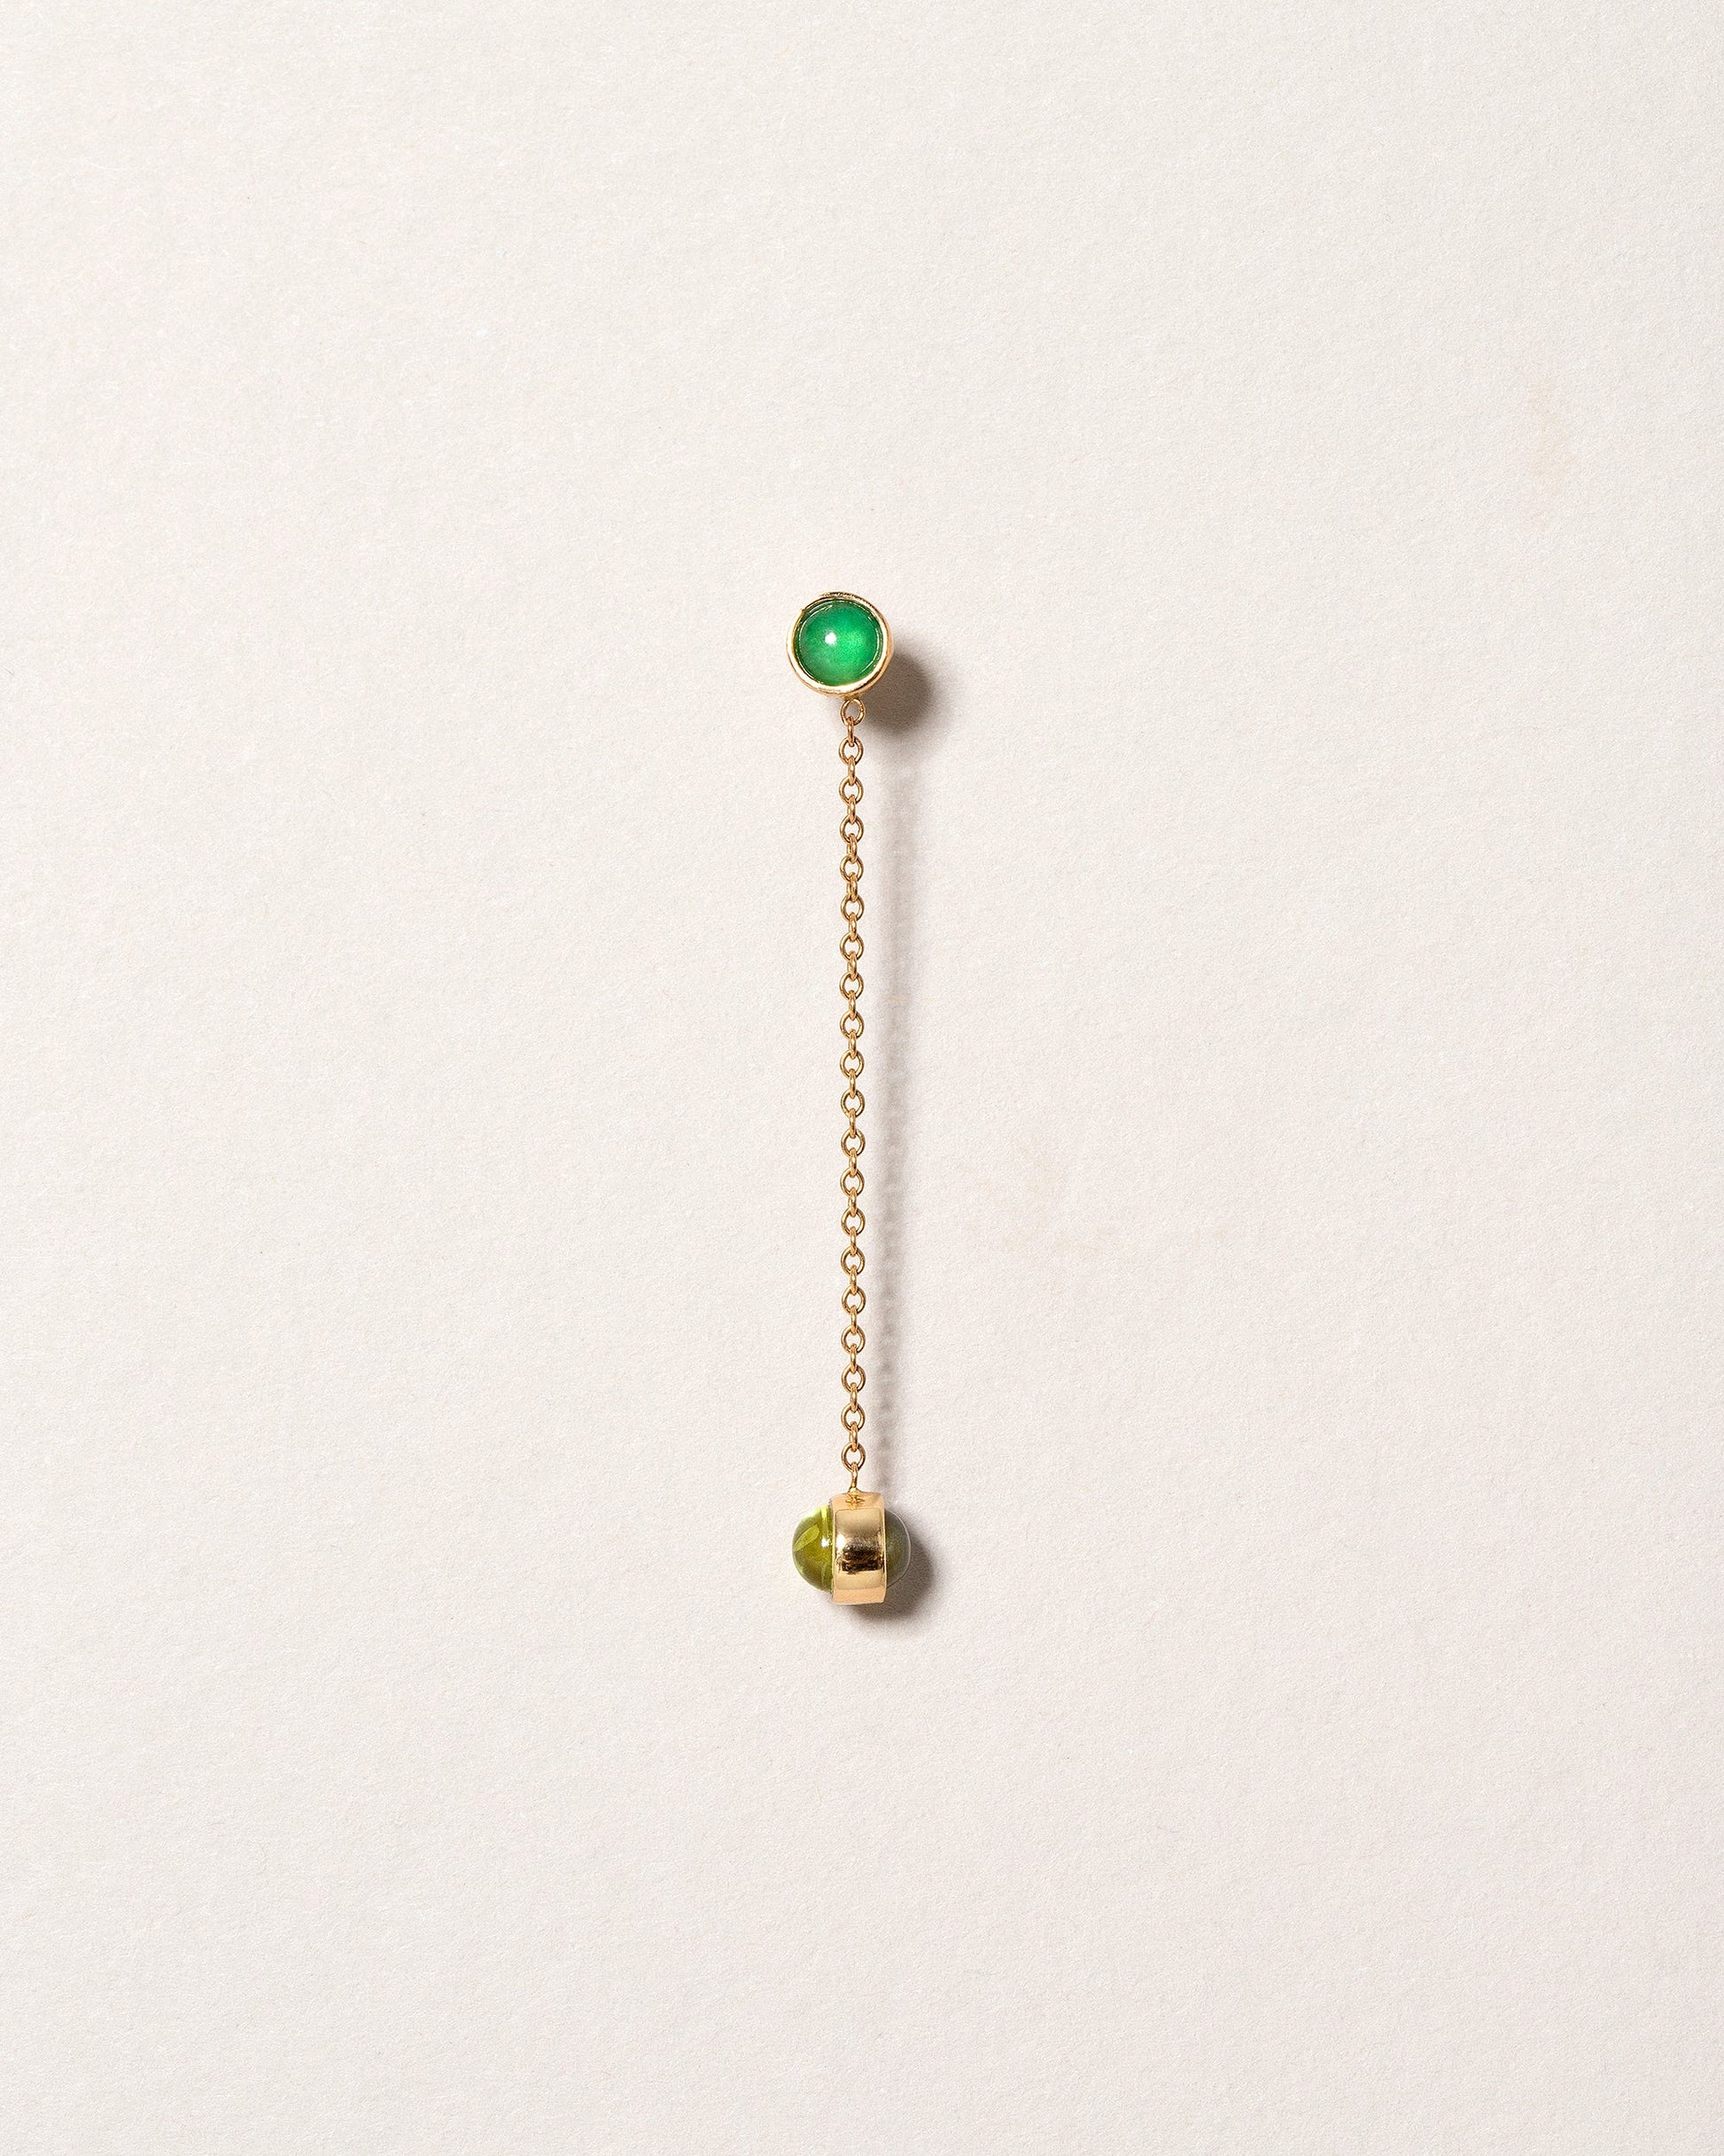  Birthstone One-Drop Single Earring on light color background.